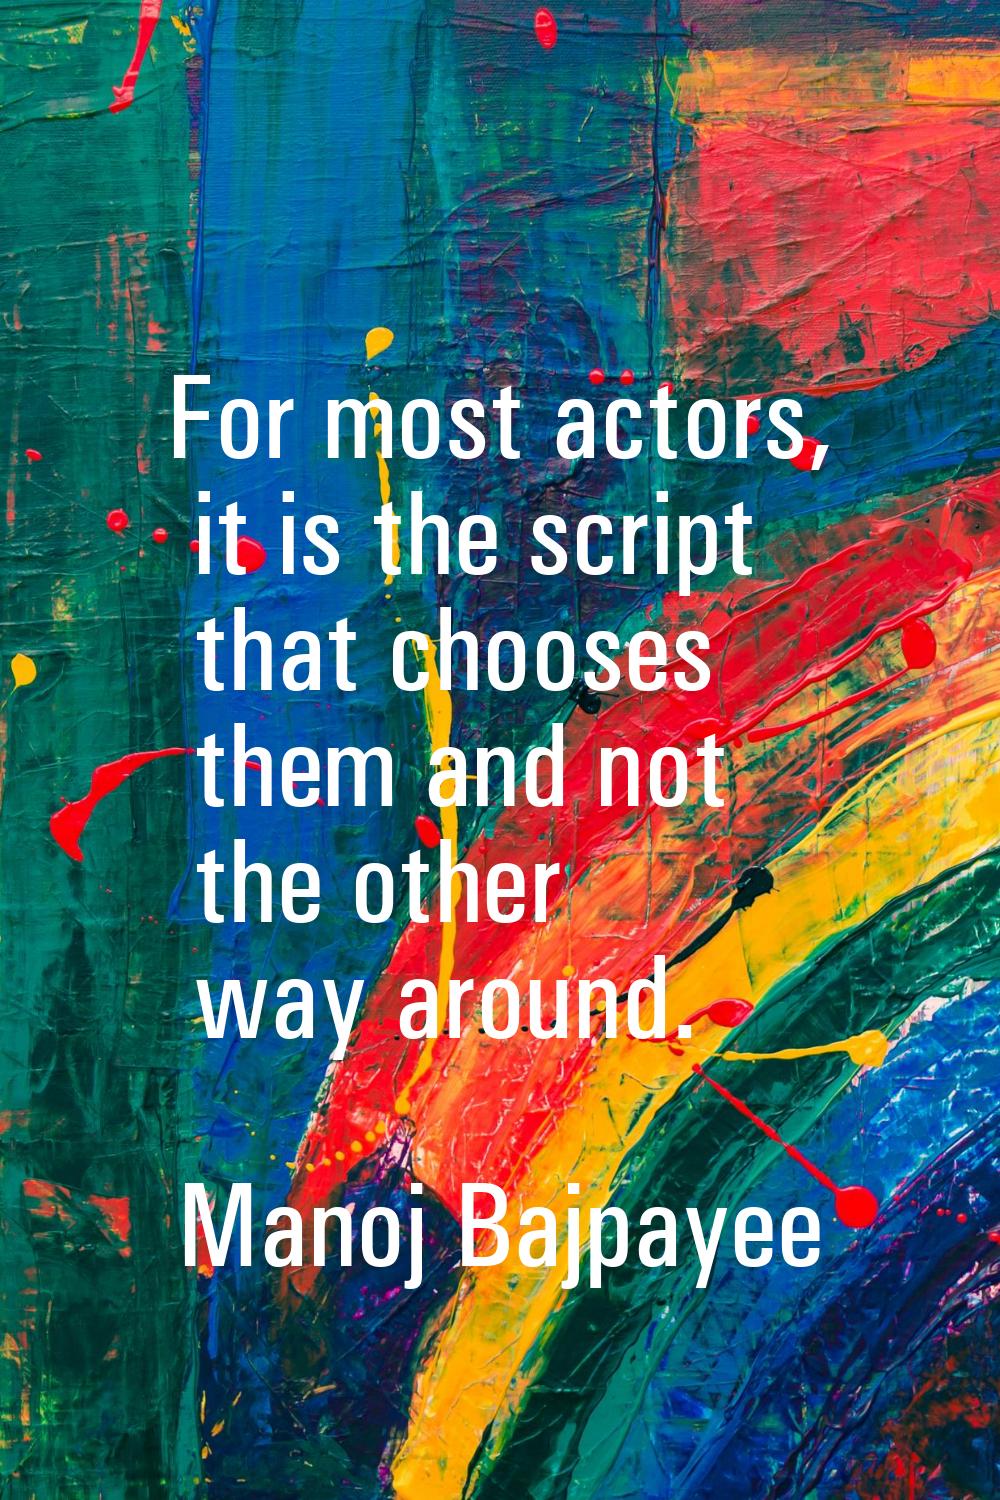 For most actors, it is the script that chooses them and not the other way around.